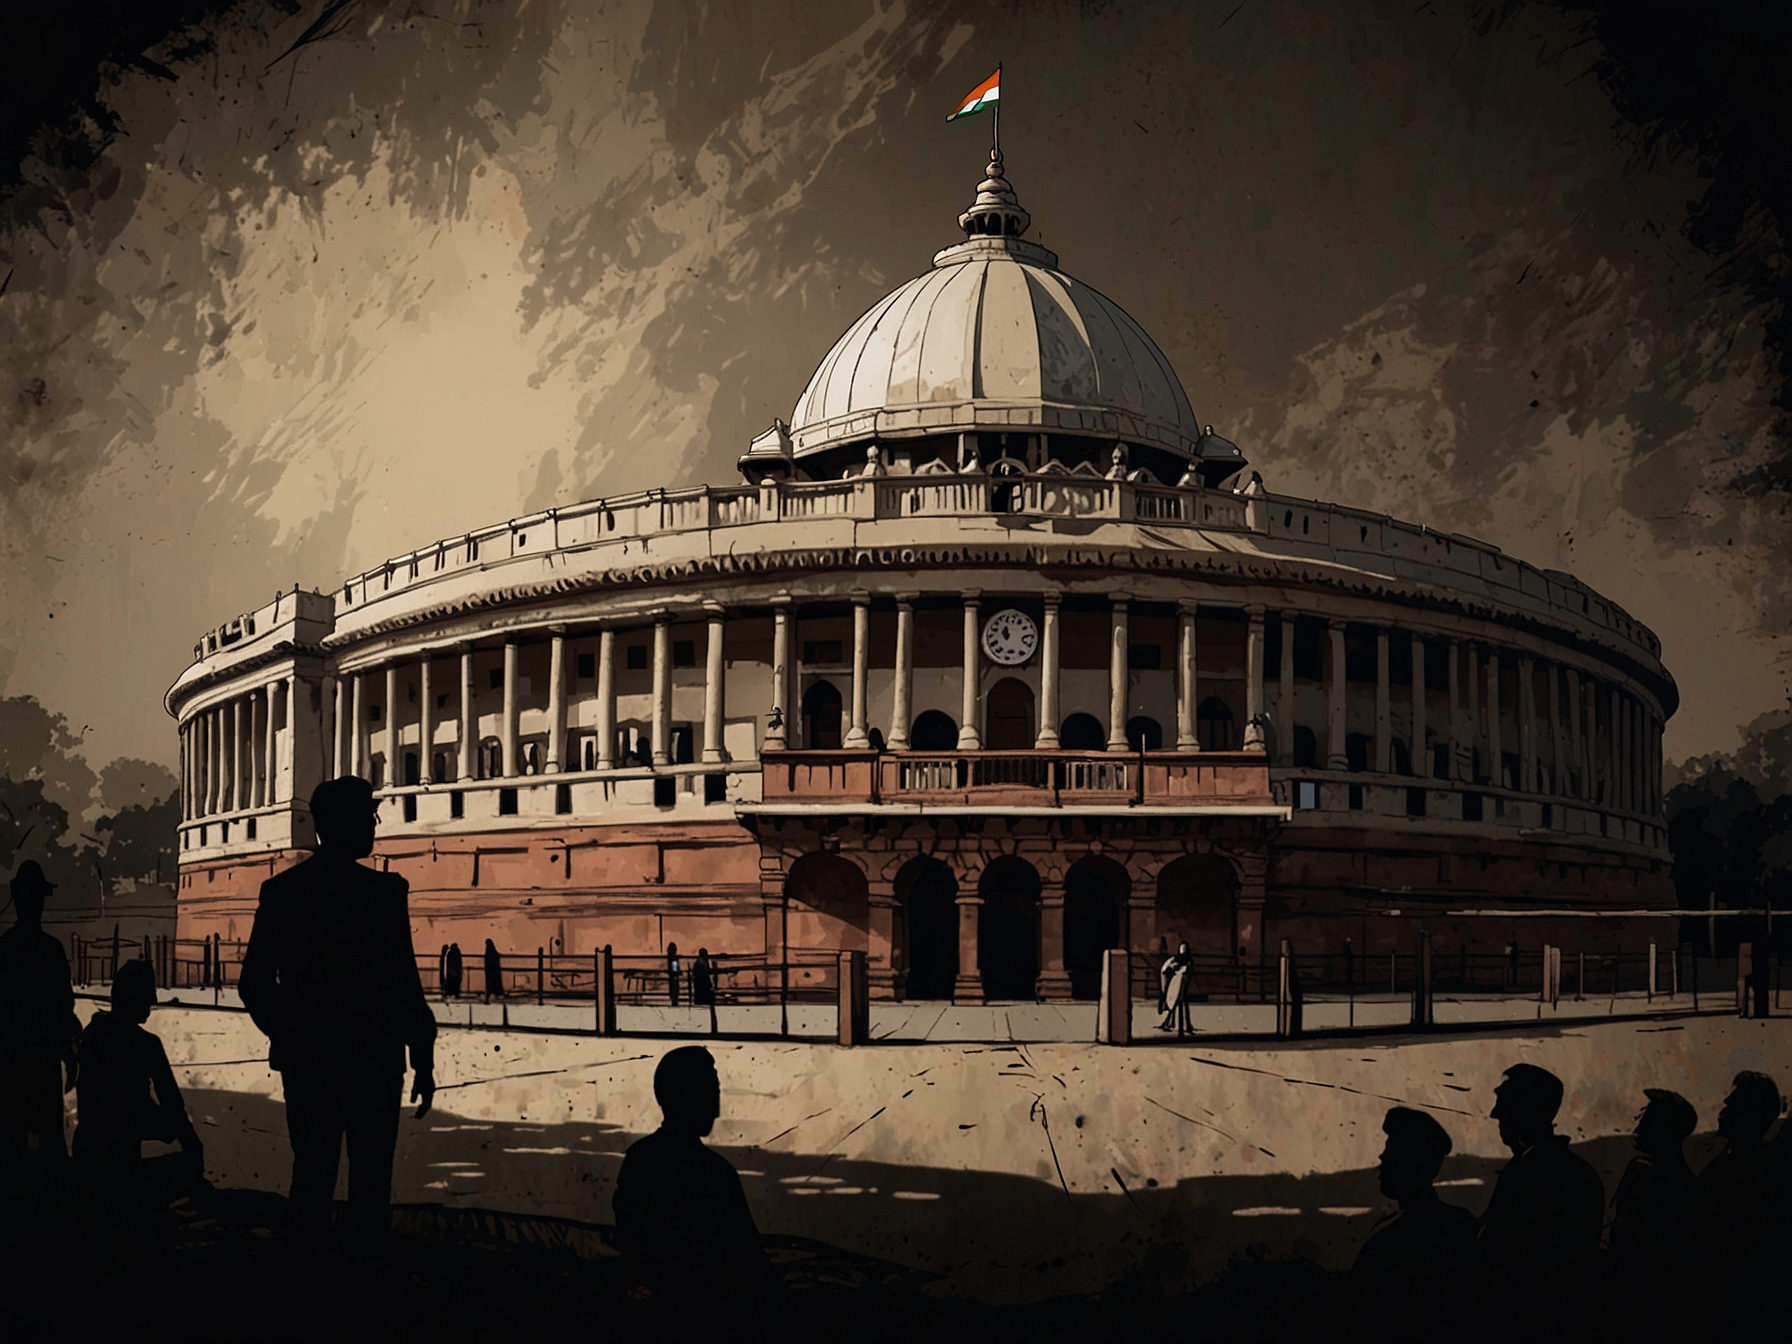 A depiction of the Indian Parliament with a shadow of Prime Minister Narendra Modi looming large, symbolizing the centralization of power and the erosion of democratic institutions as described by Raut.